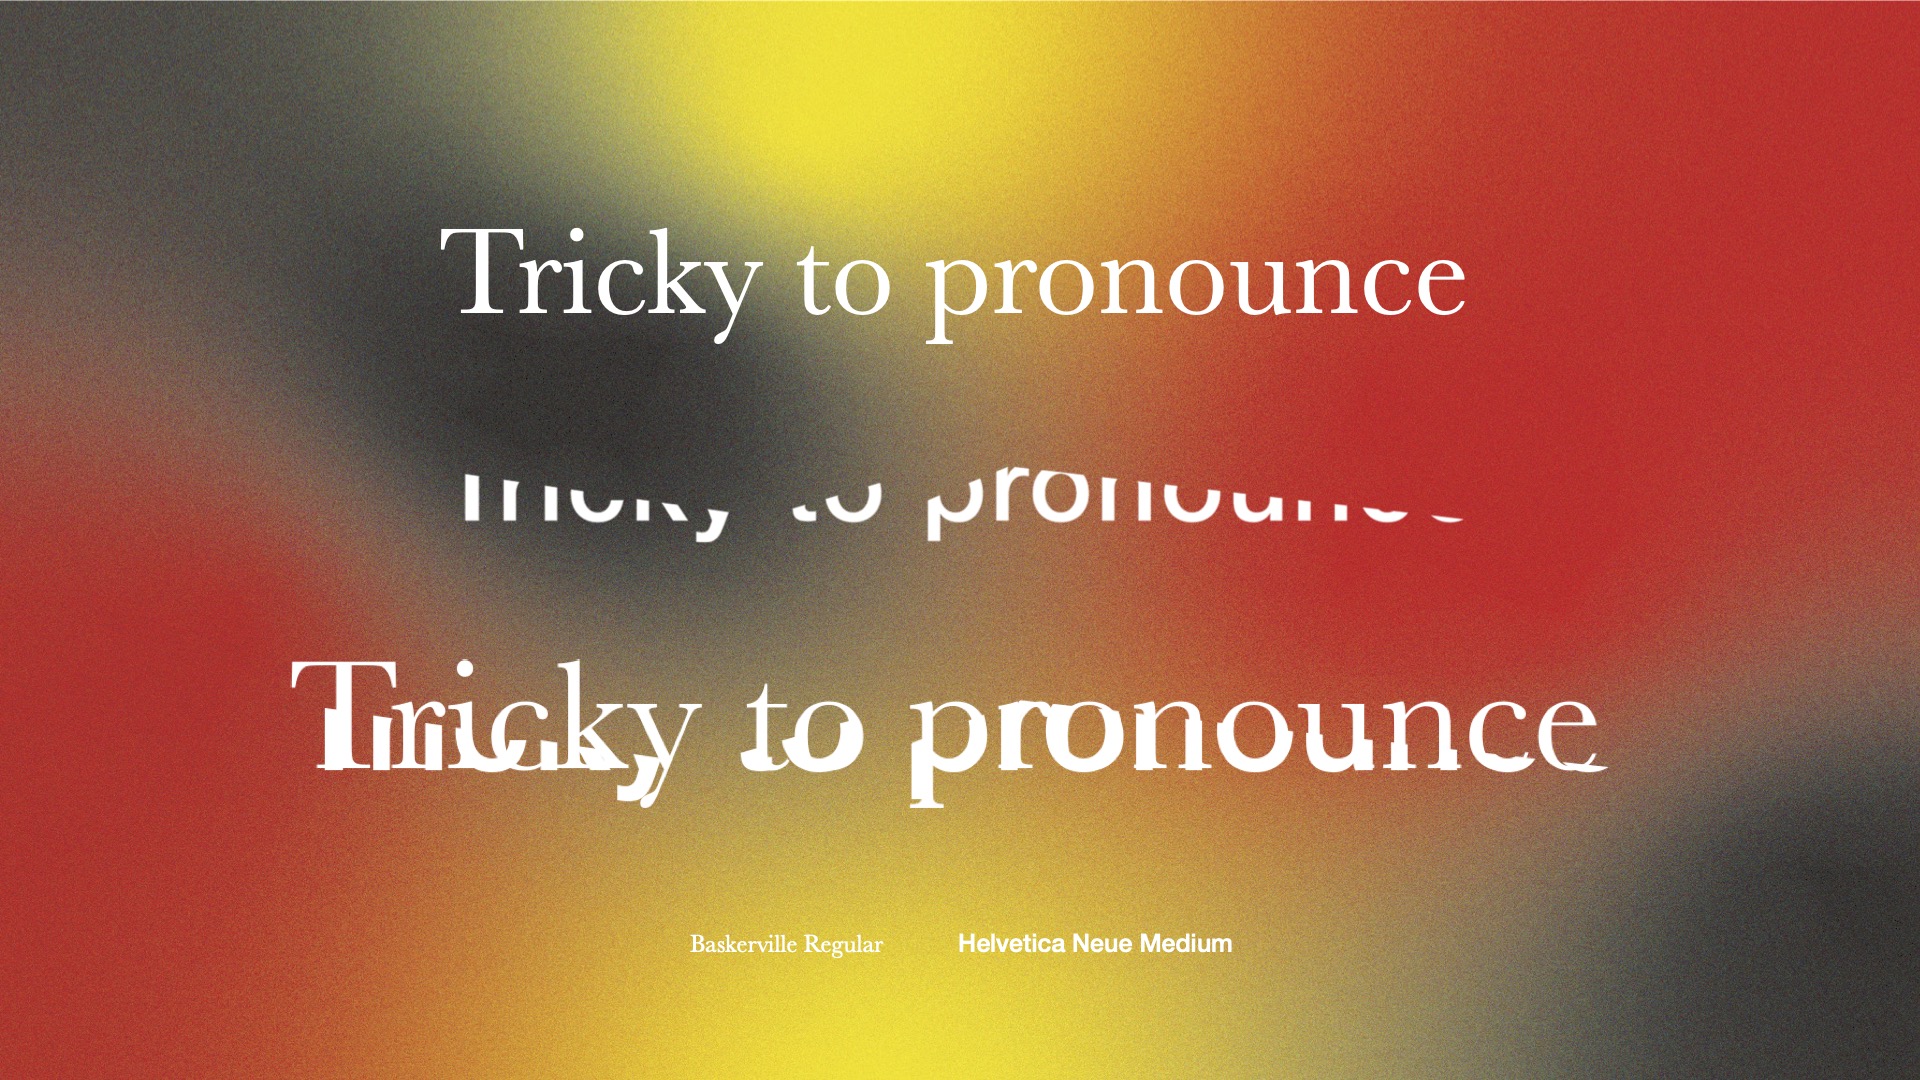 Breakdown of type made up of overlayed text saying 'tricky to pronounce' three times on a red, black, and yellow gradient background, with each type becoming more distorted.